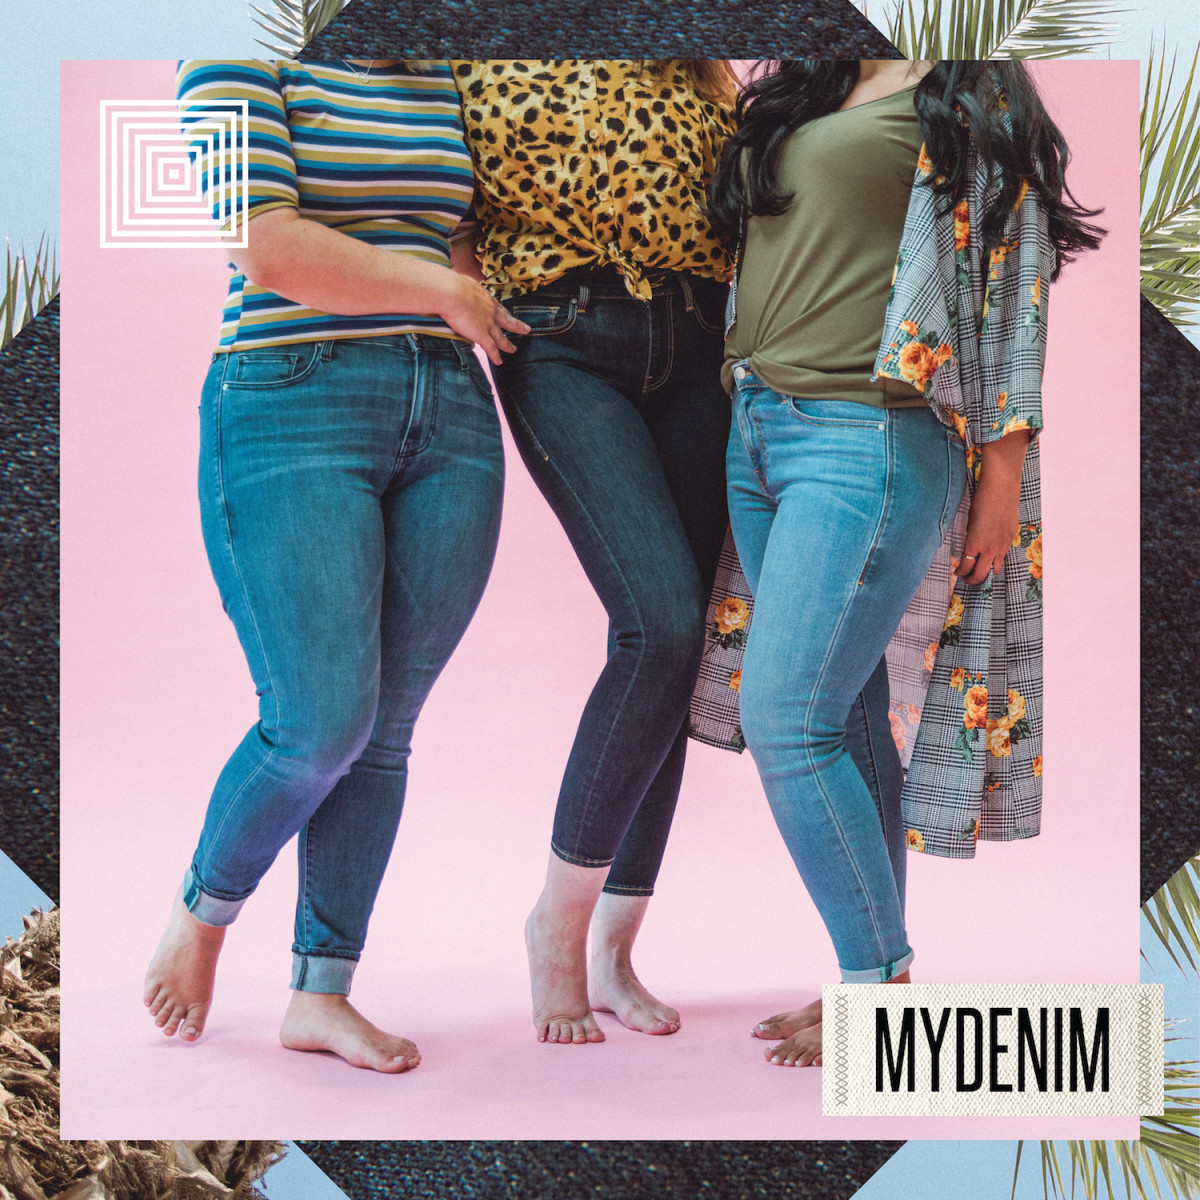 lularoes-mydenim-will-be-available-soon